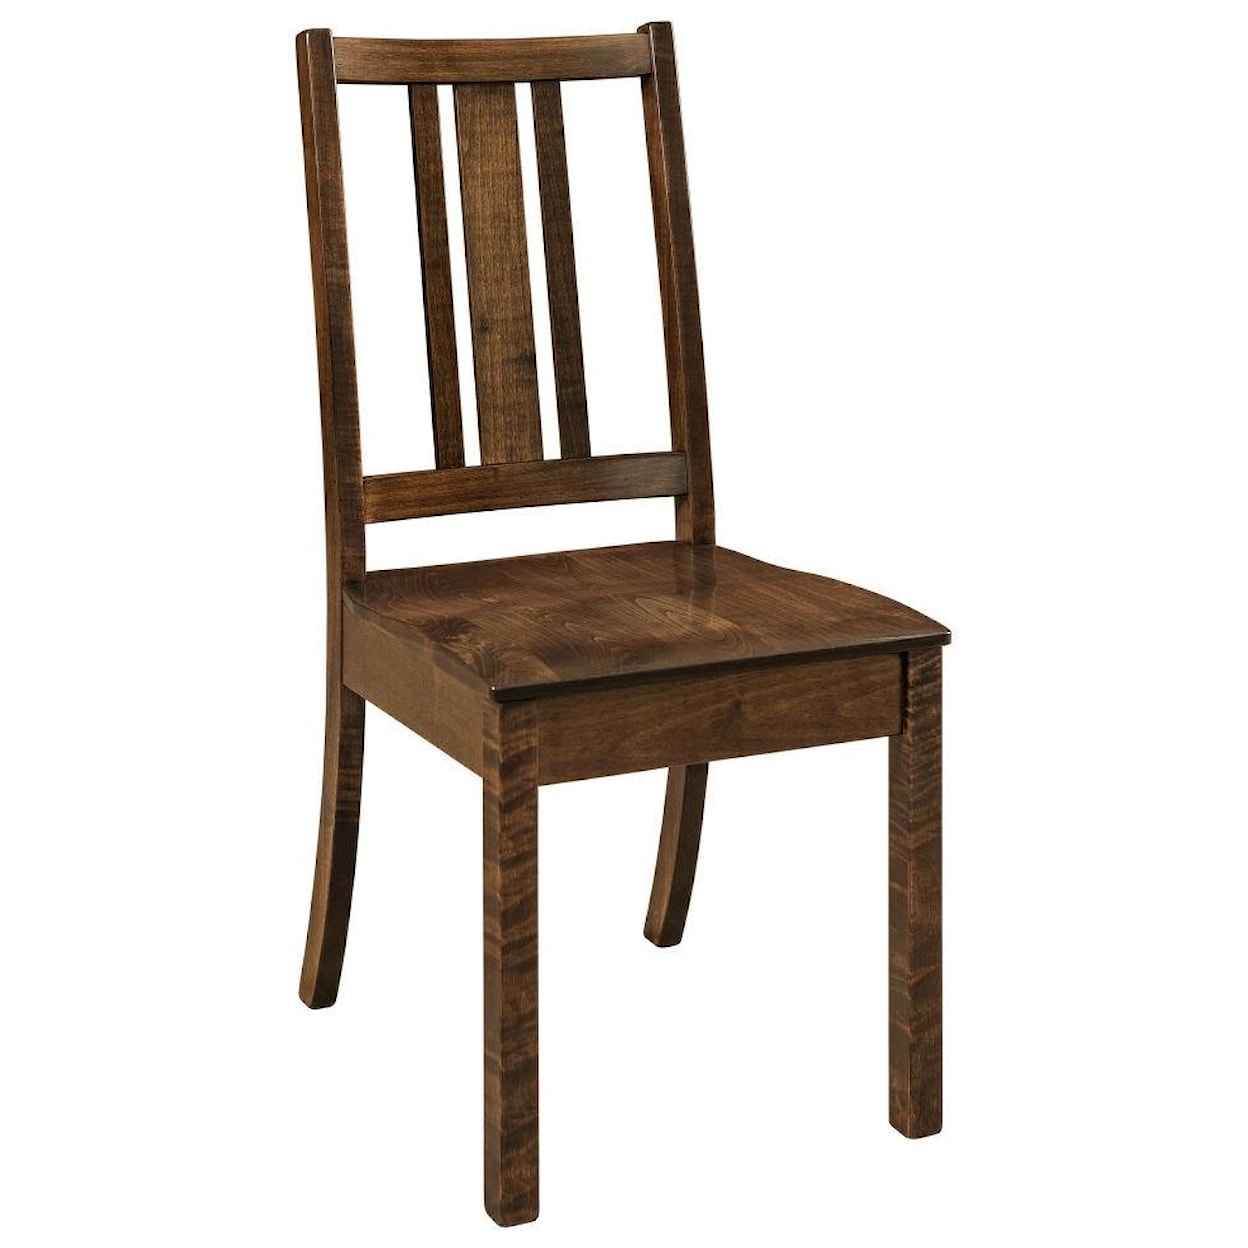 F&N Woodworking Eco Eco Side Chair